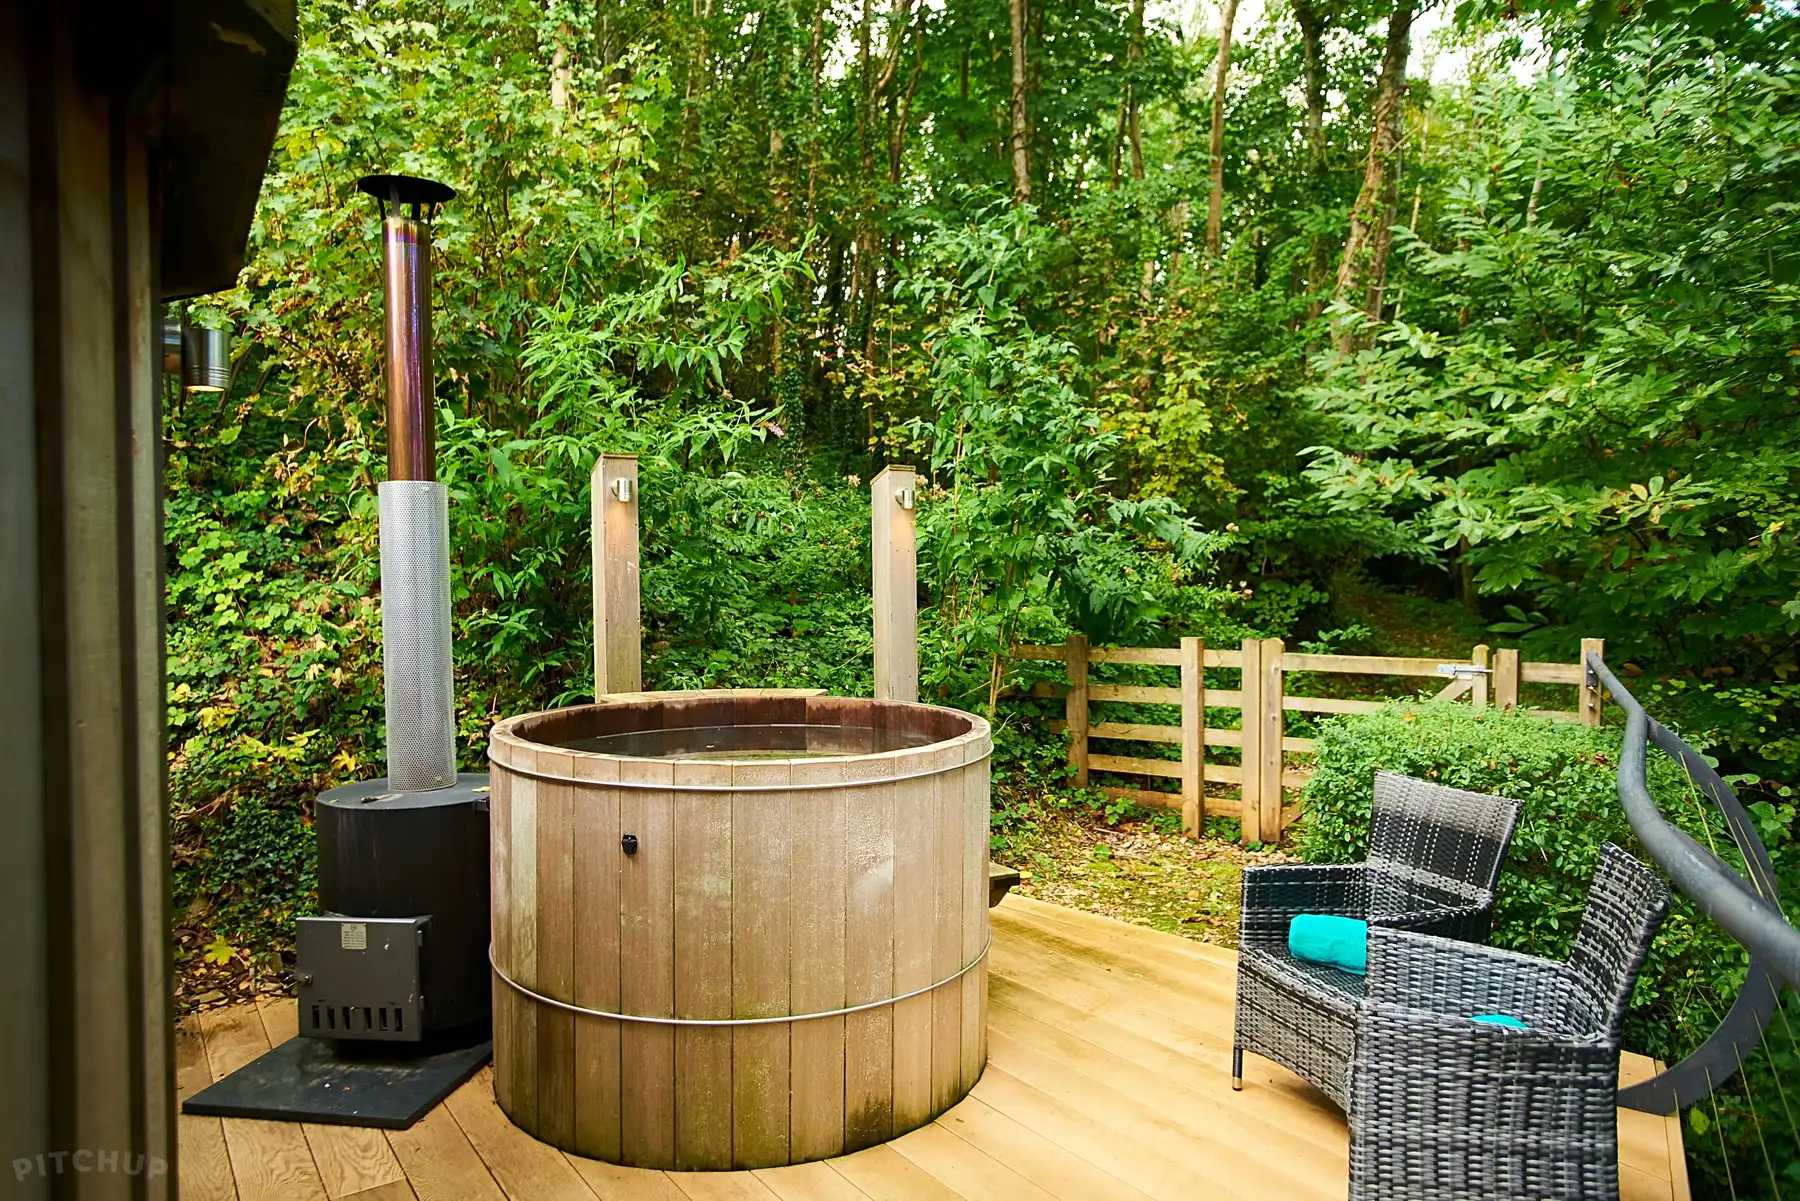 Exclusive-use hot tubs can add value to the income from your glamping pods